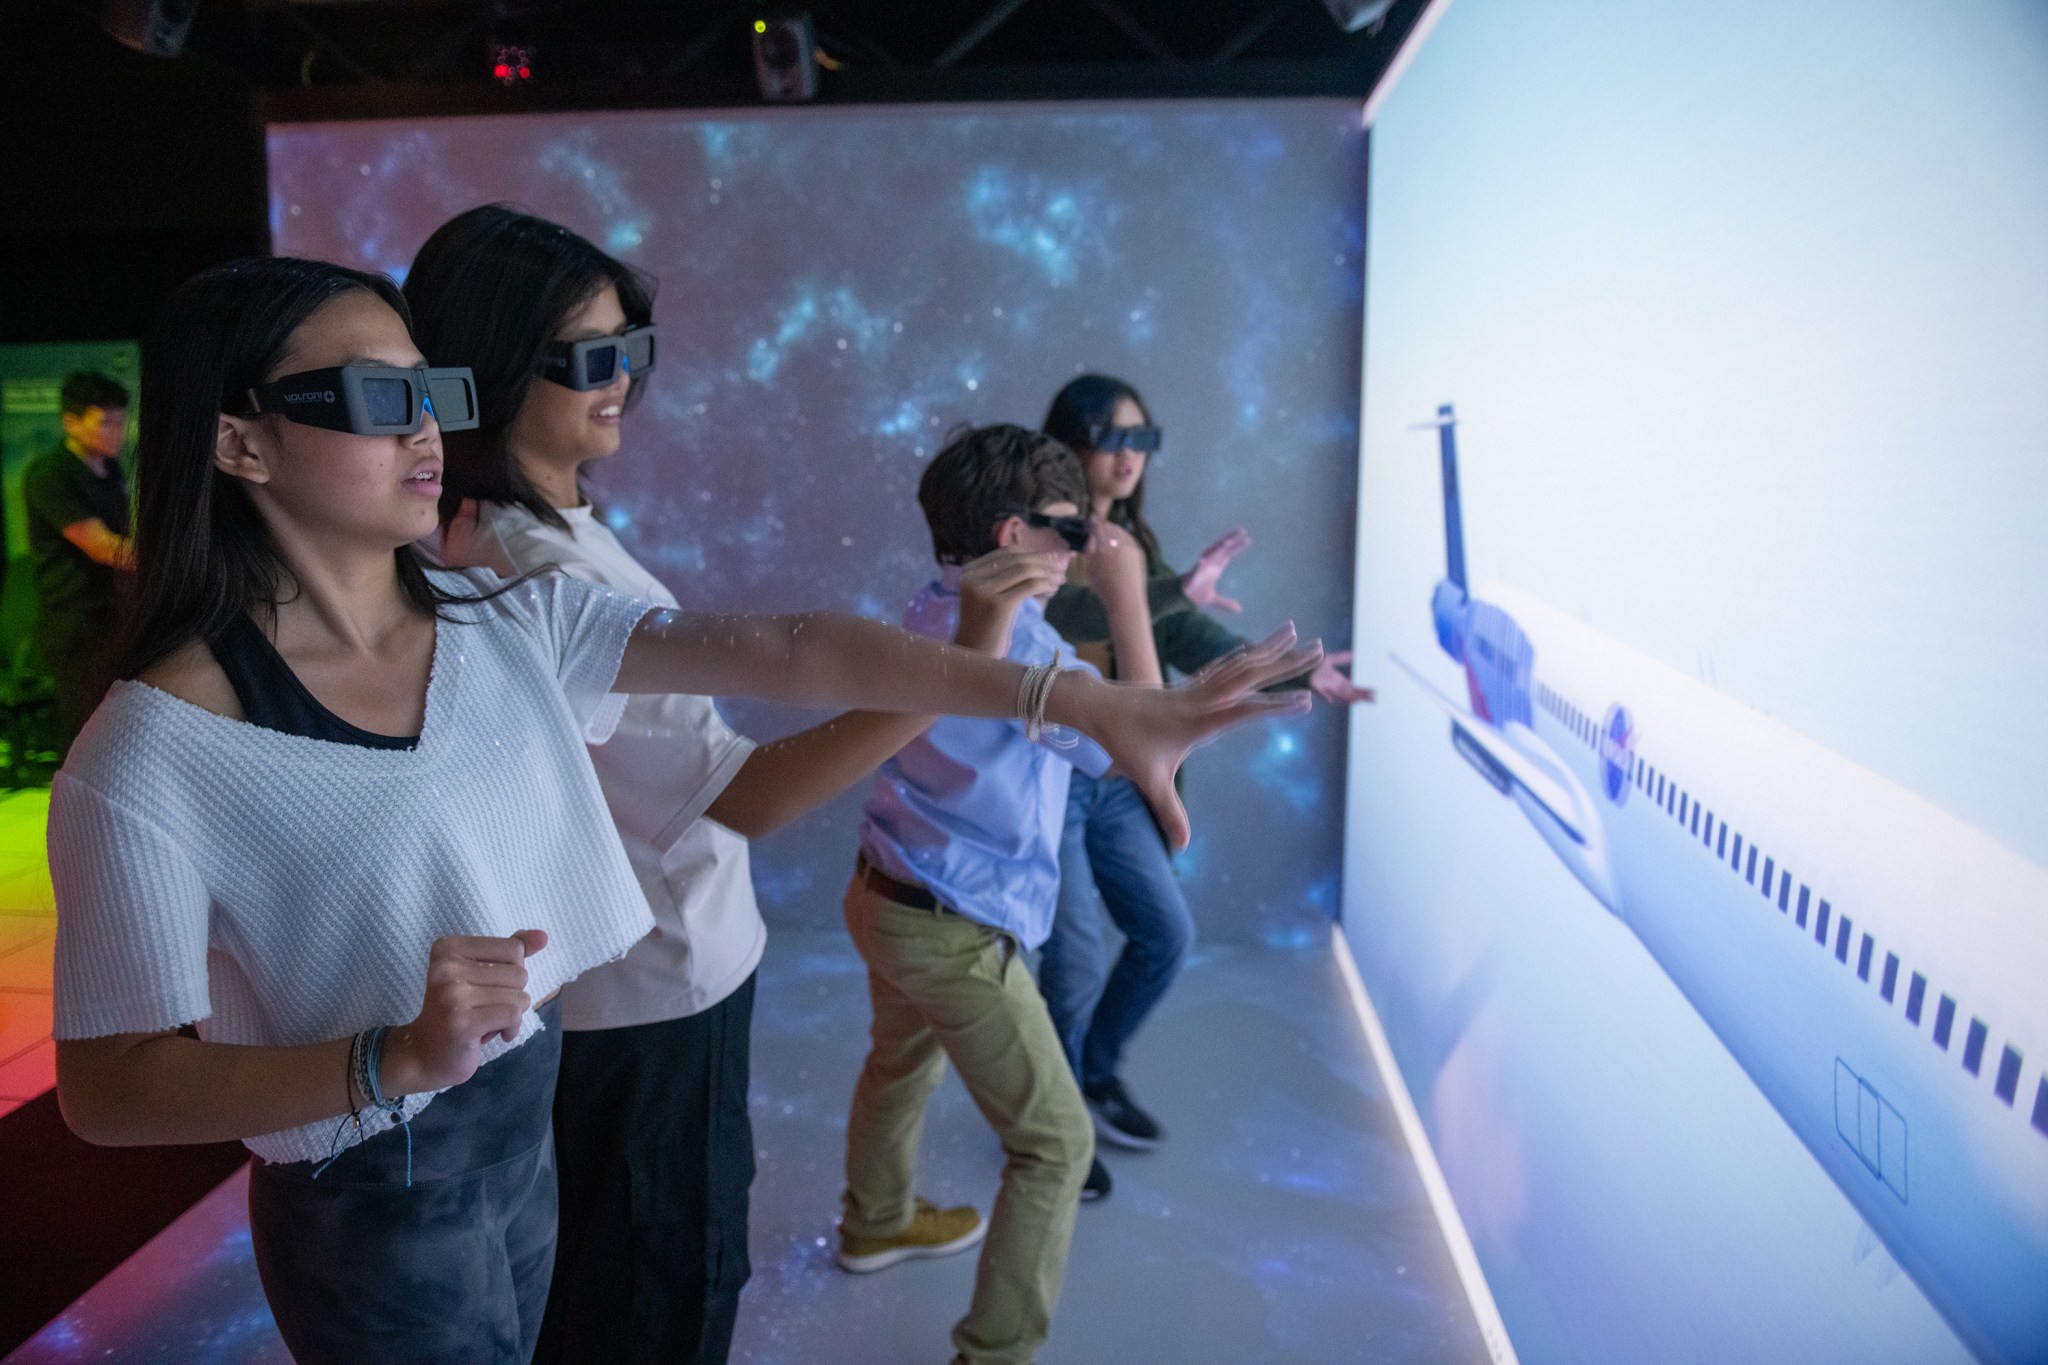 Francesca Esma (left), Rainelle Yasa, Luca Pollack, and Audrielle Paige Esma interact with a NASA plane in virtual reality at NASA Glenn’s Graphics and Visualization (GVIS) Lab.